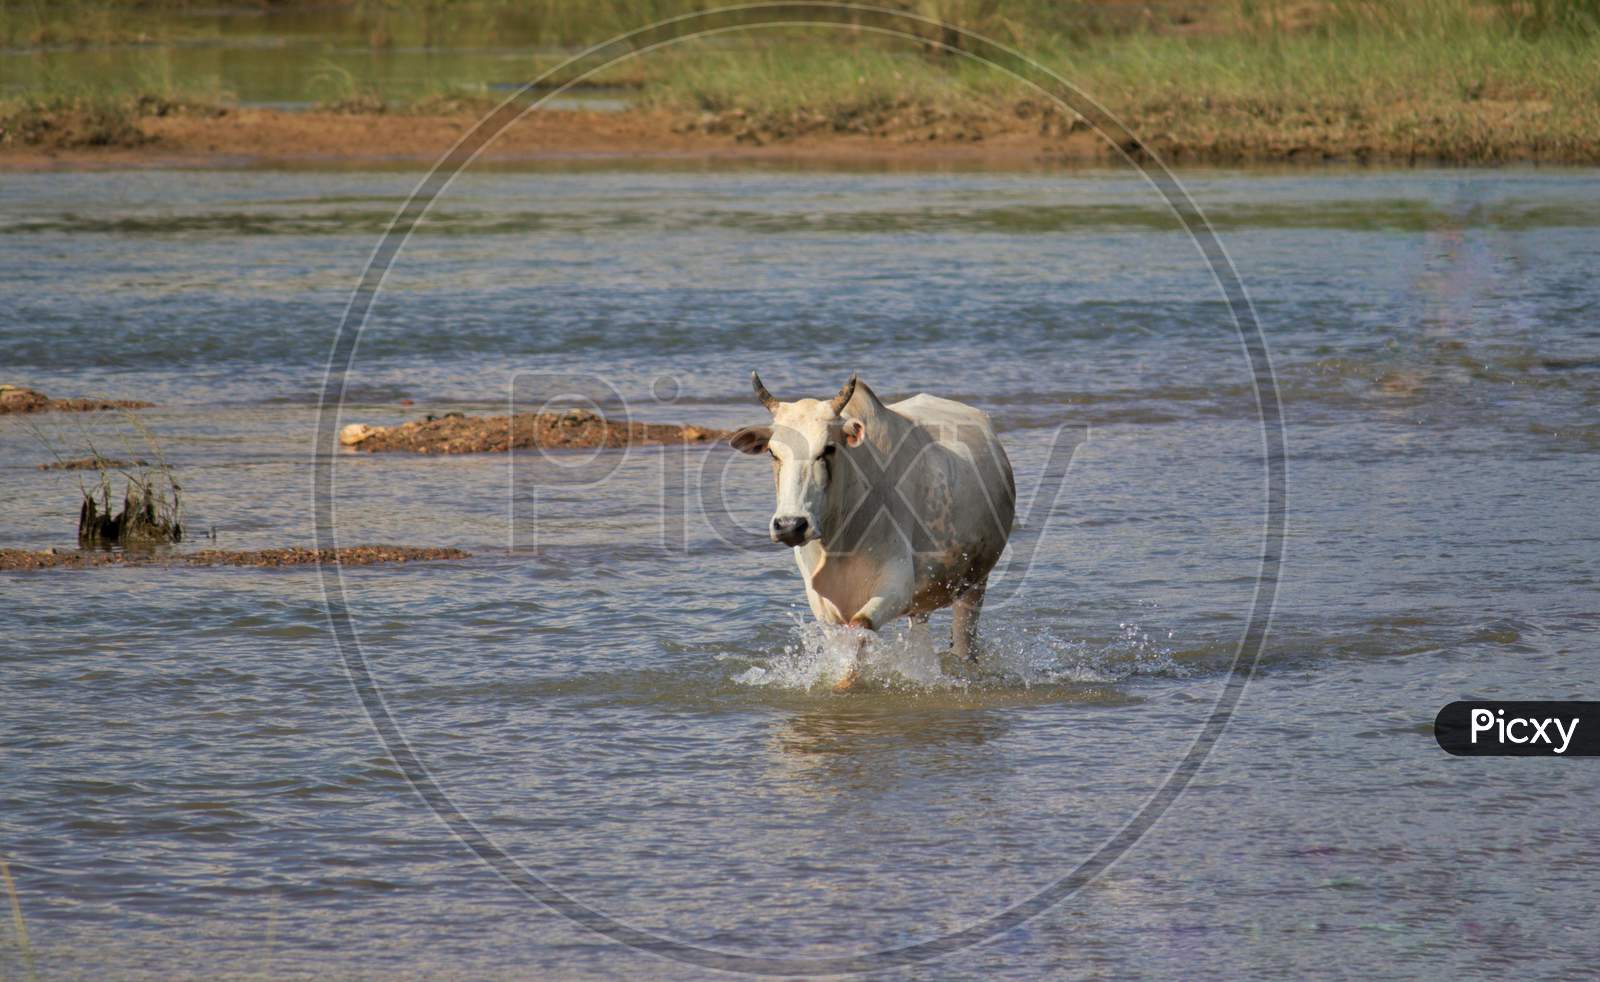 Cow Running In River Water To Cross It, Indian Countryside Beauty, Perfect For Wallpaper